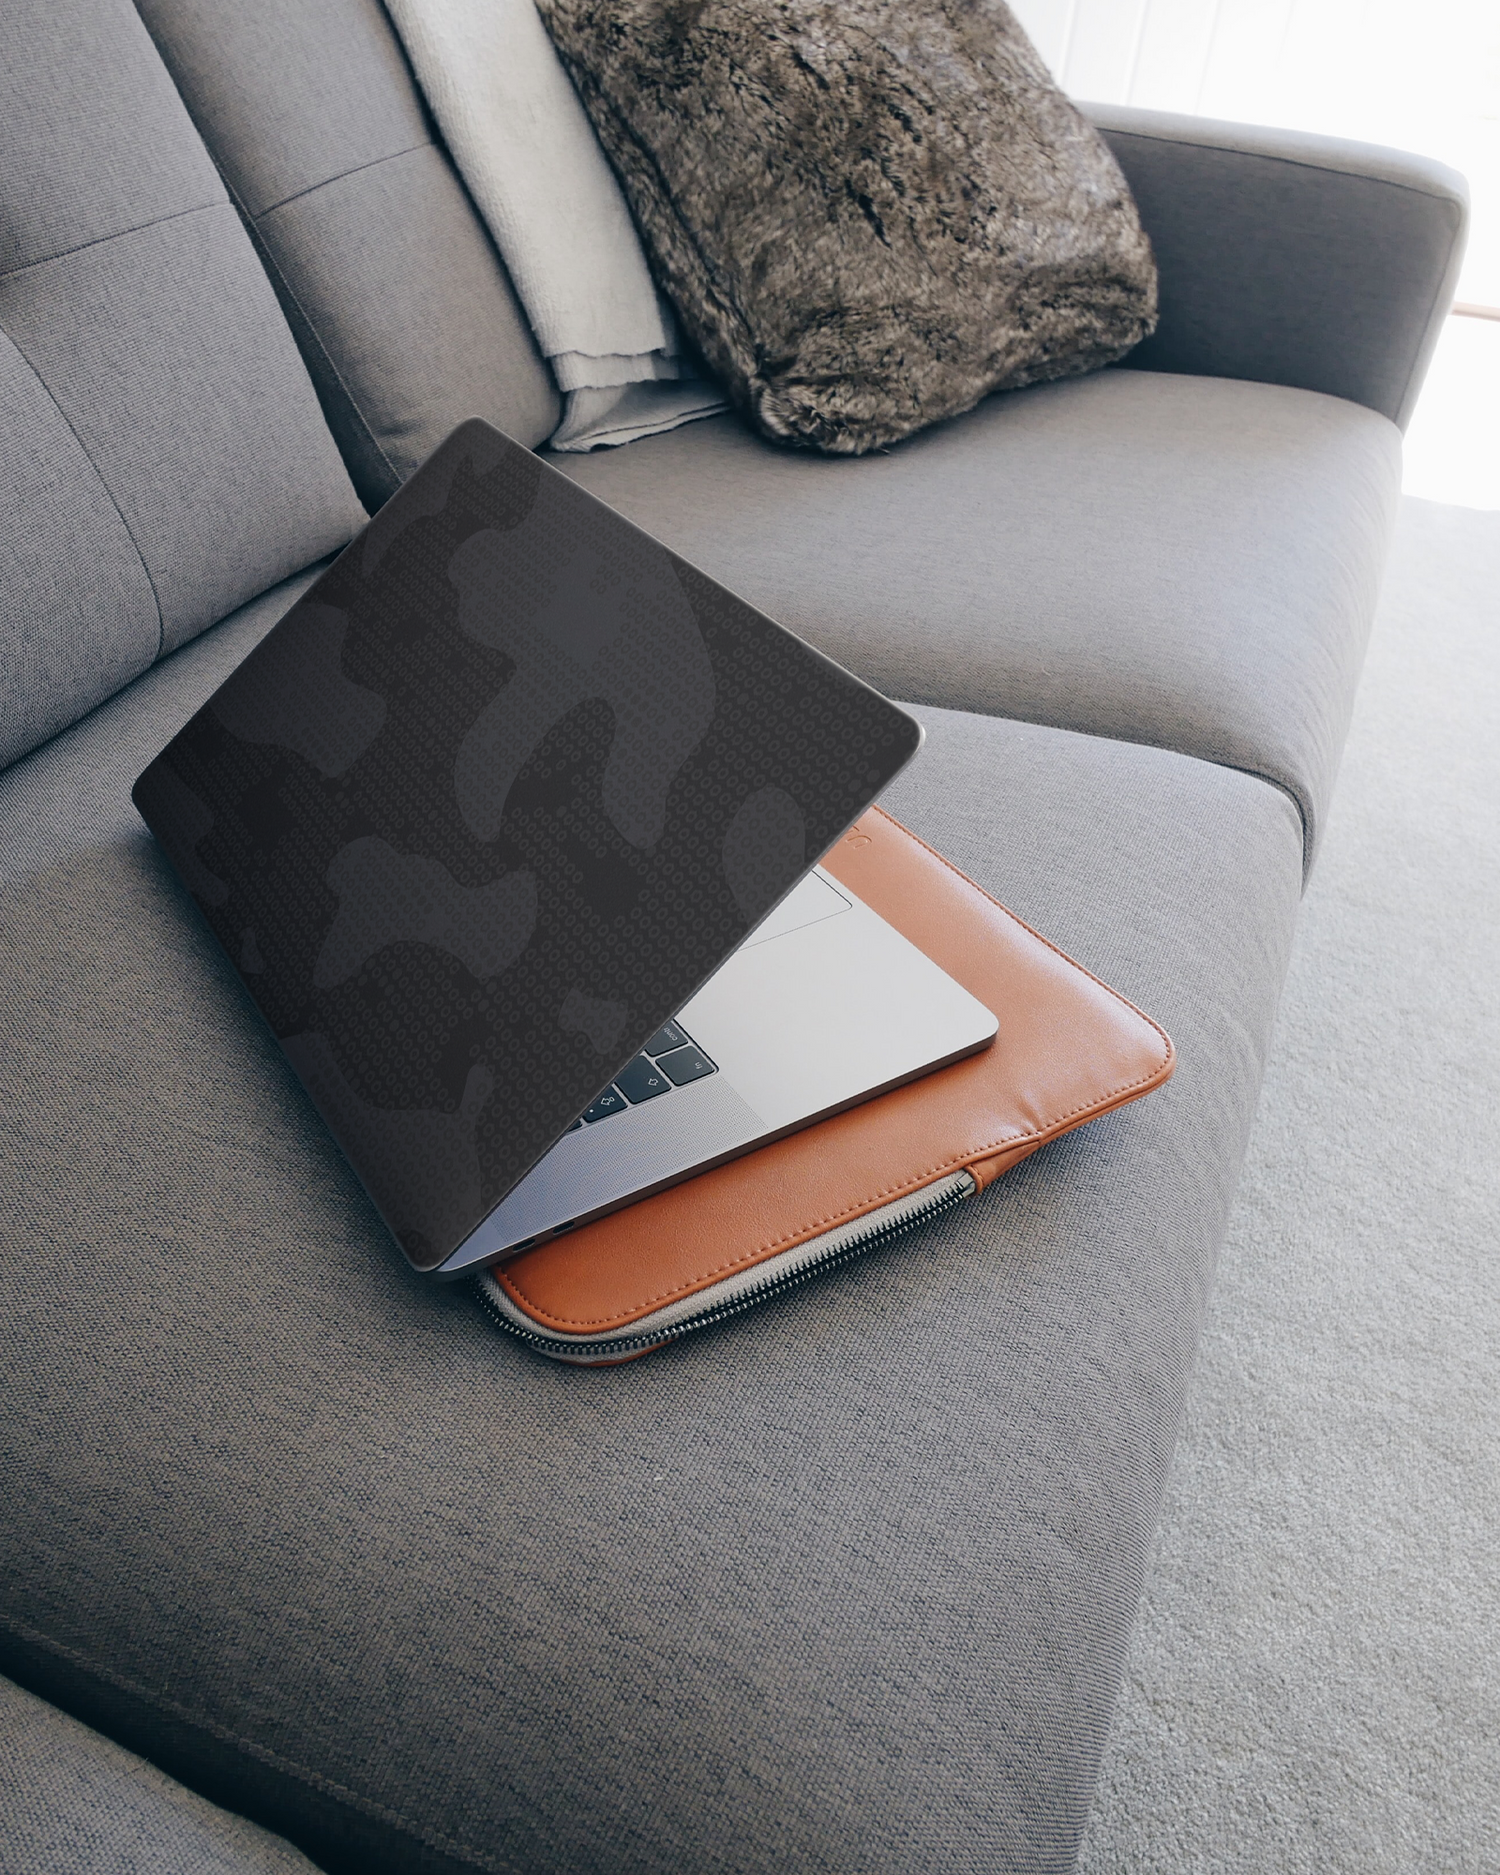 Spec Ops Dark Laptop Skin for 15 inch Apple MacBooks on a couch